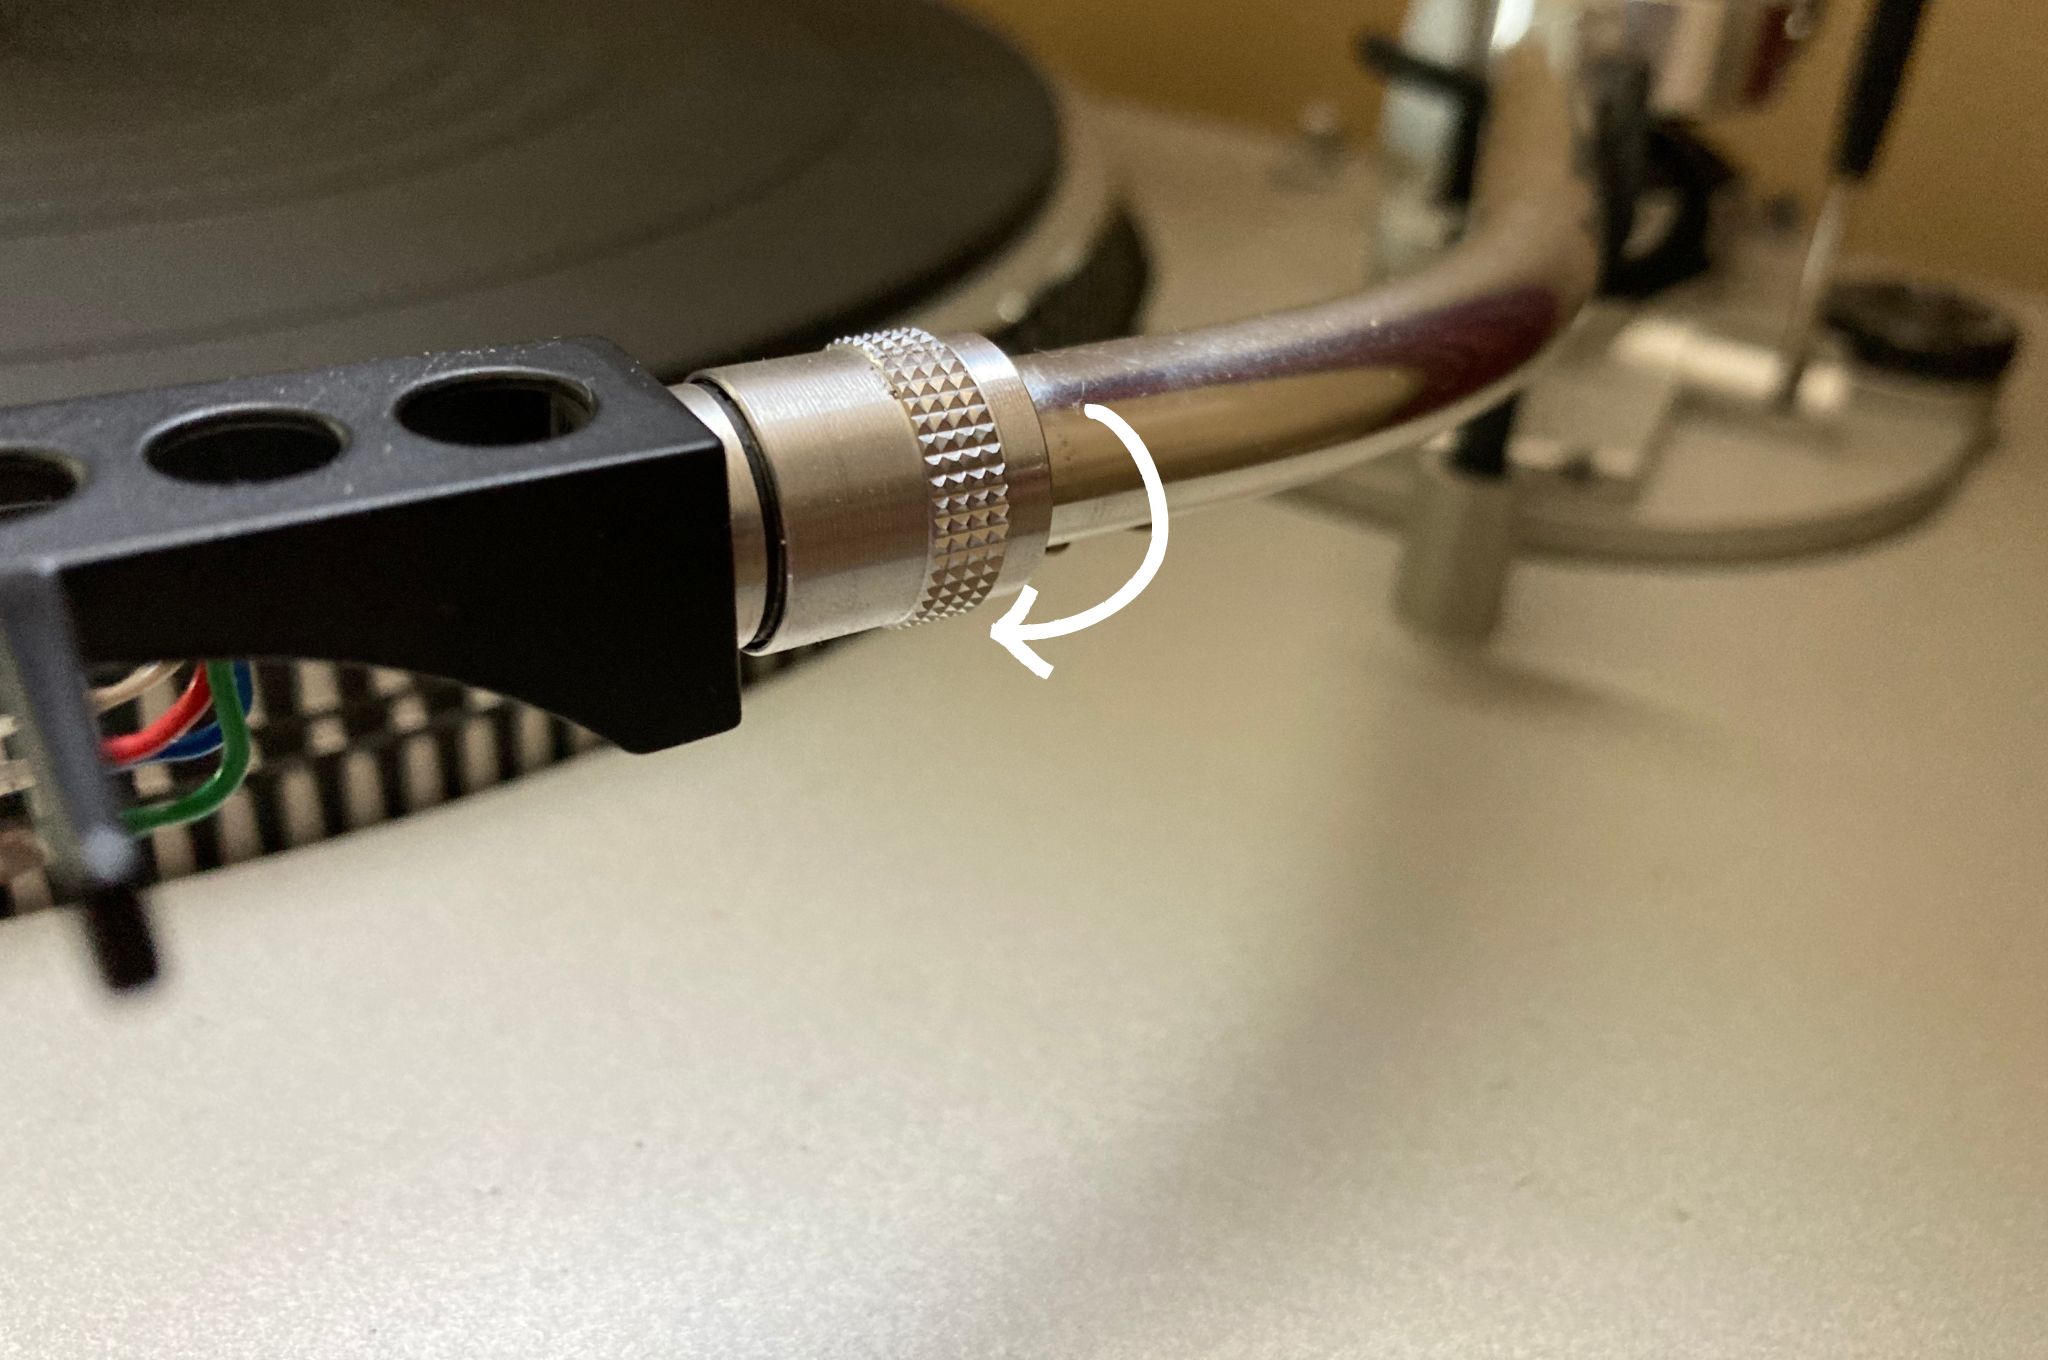 Turntable's tonearm ring being loosened to remove the headshell